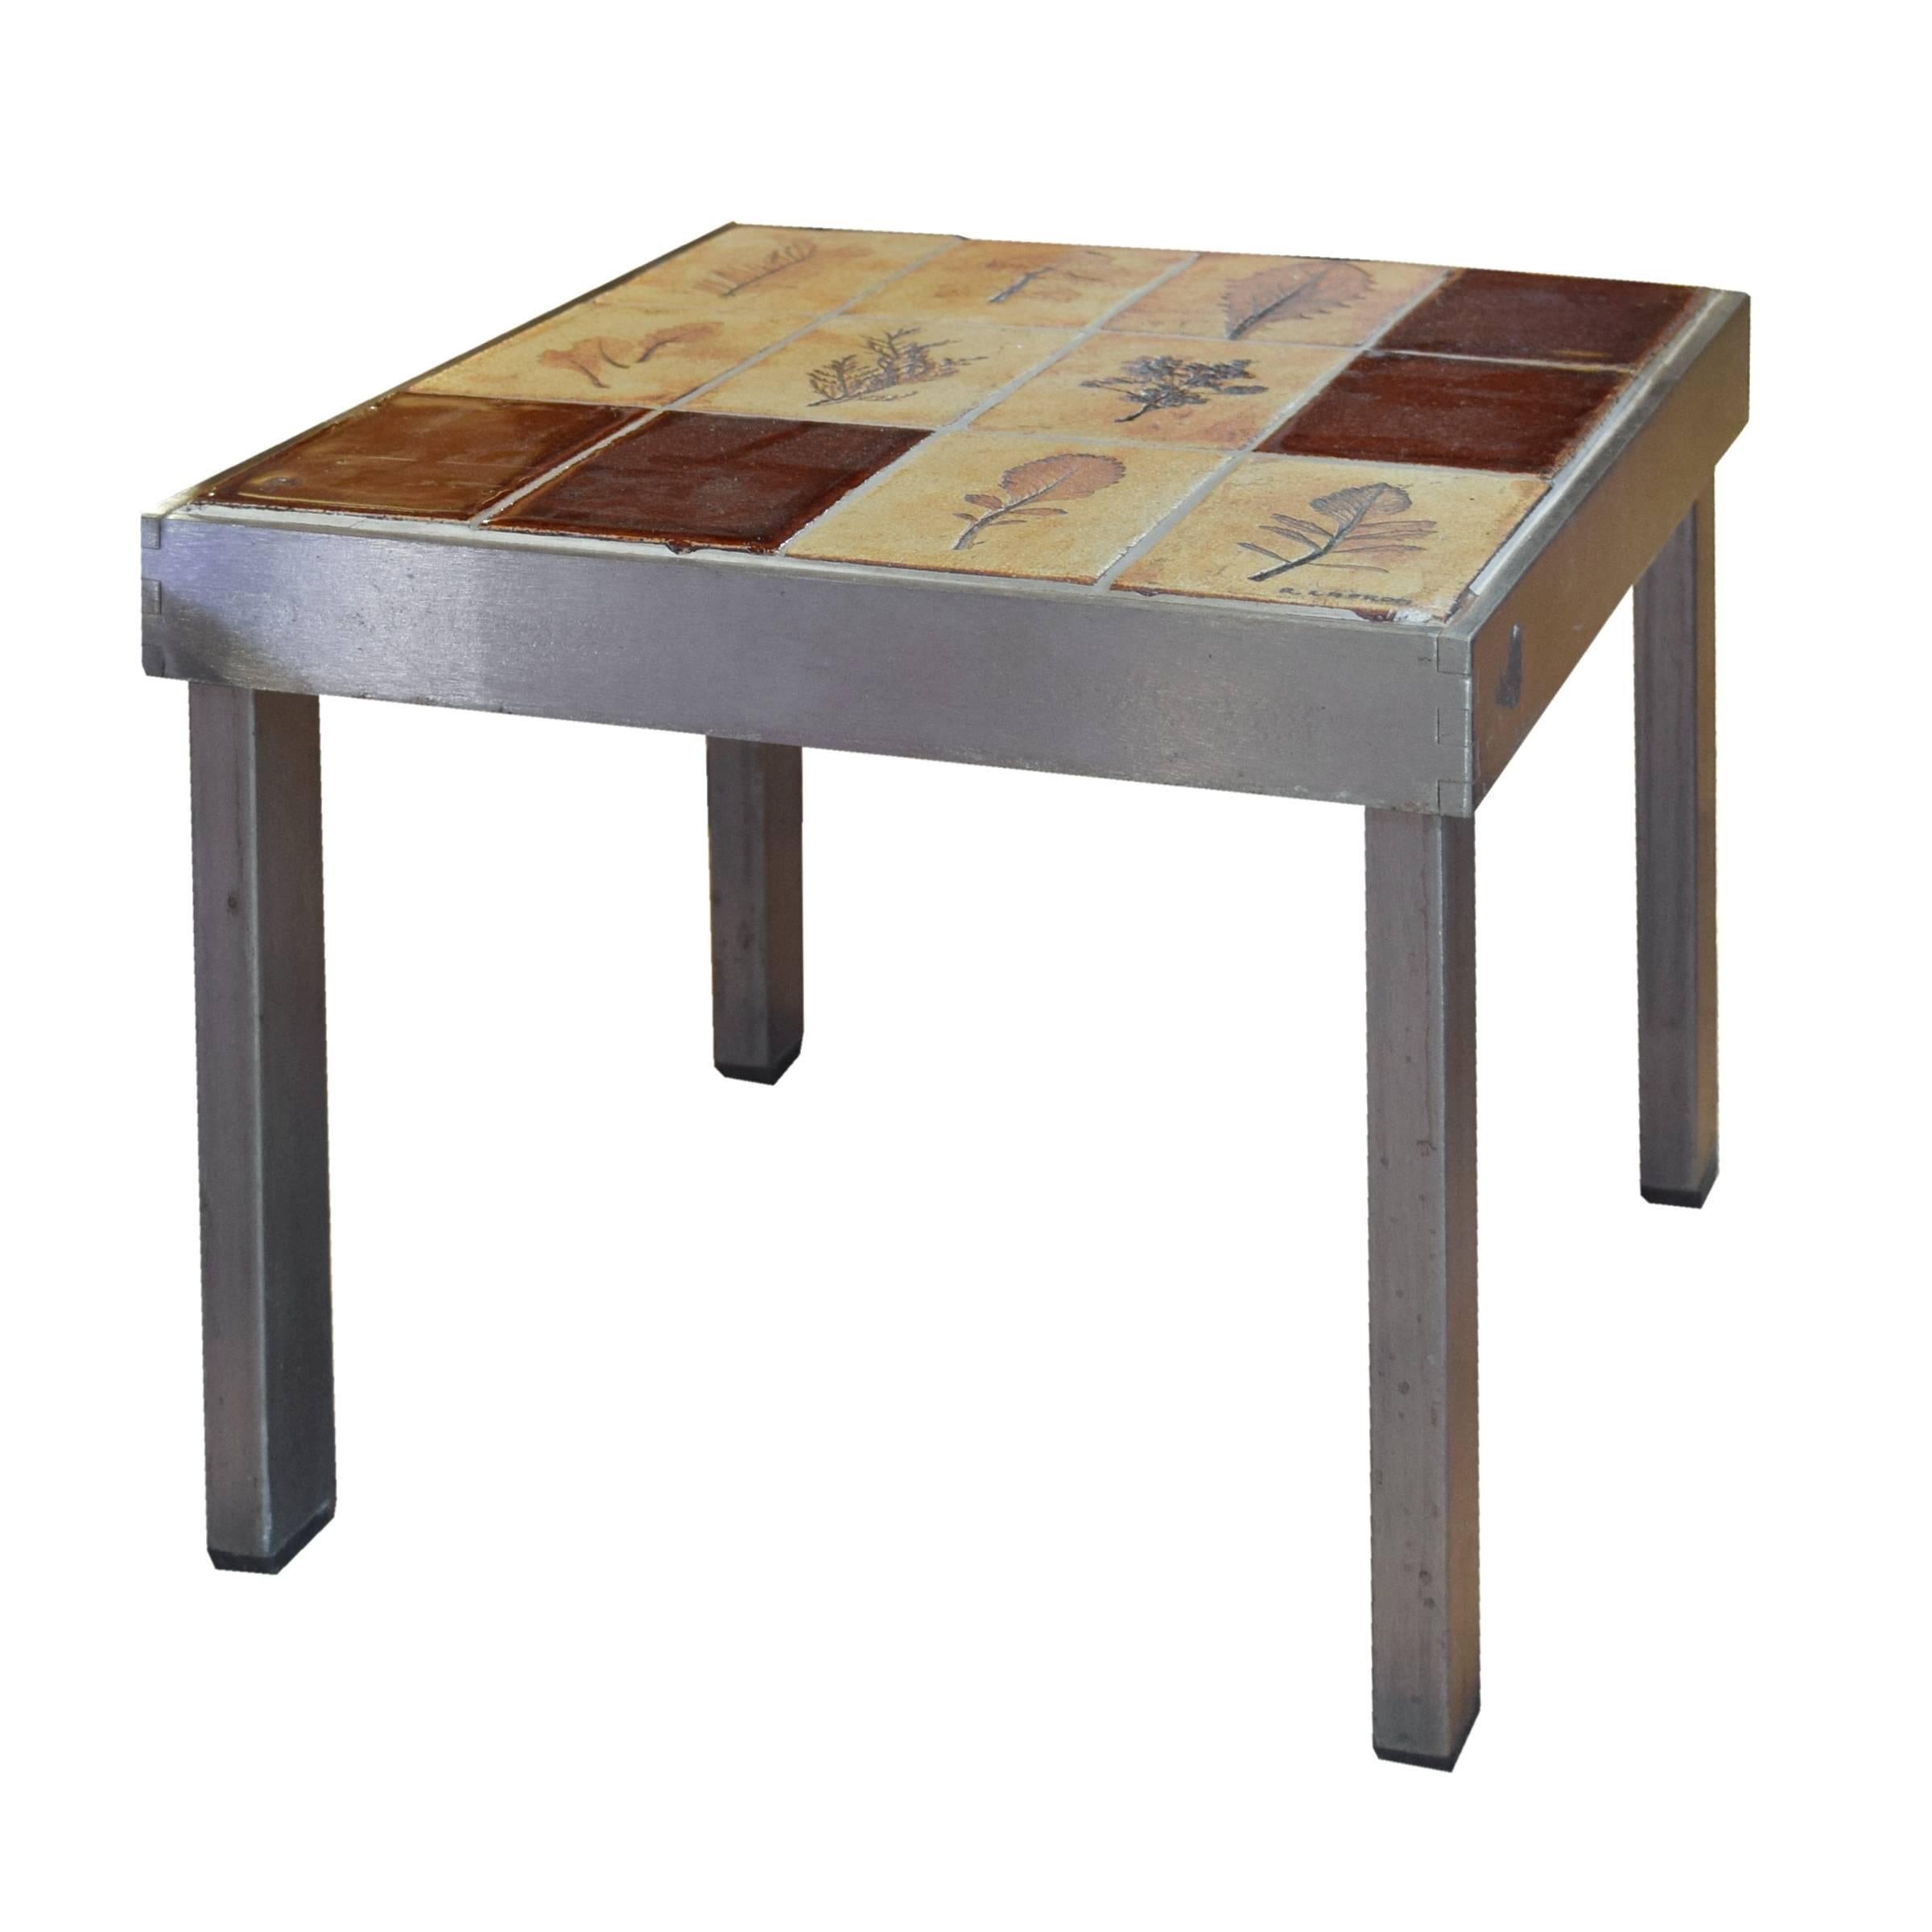 Pair of French Midcentury Steel and Tile Tables by Roger Capron 1